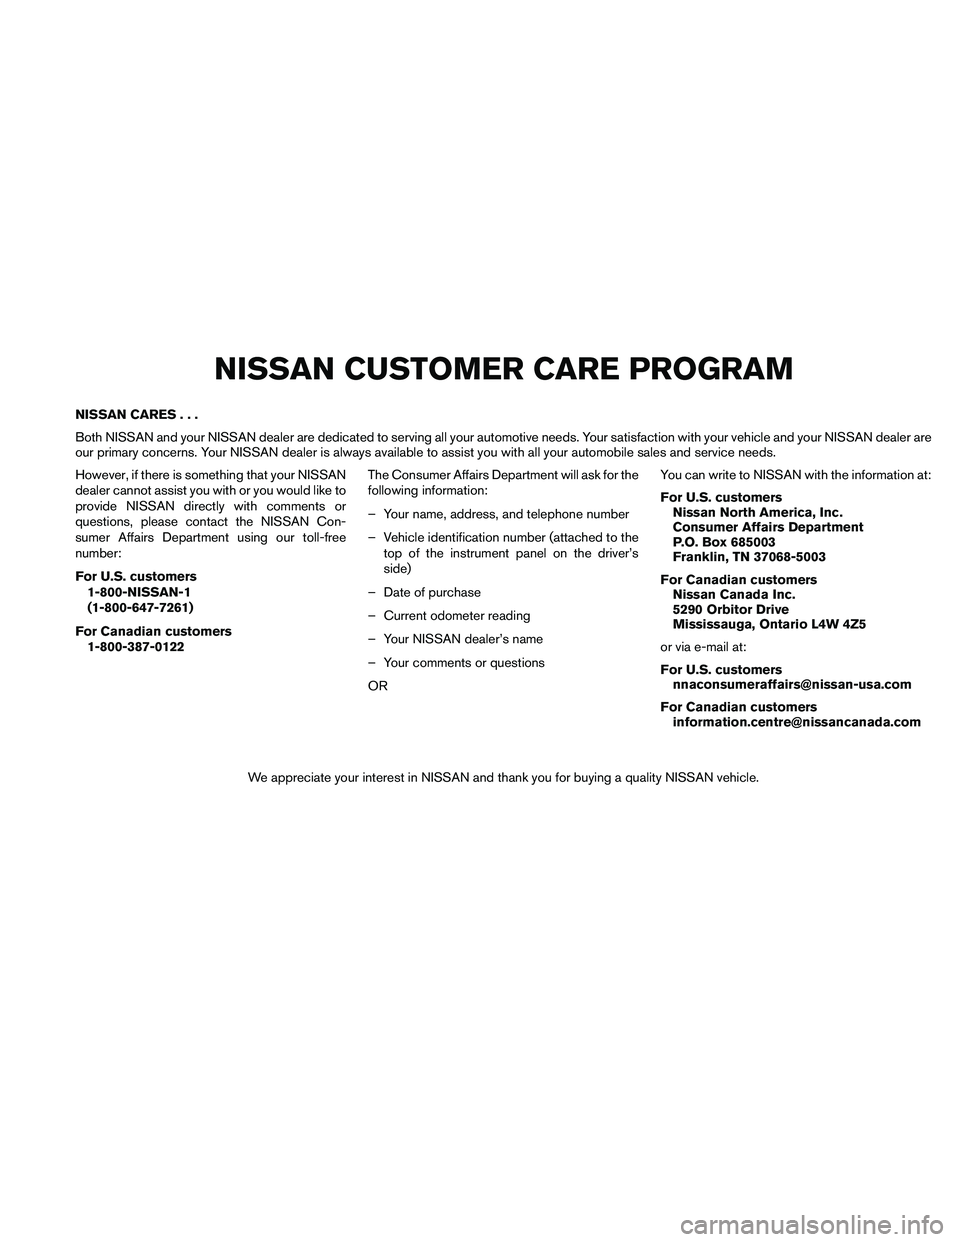 NISSAN FRONTIER 2011  Owner´s Manual NISSAN CARES...
Both NISSAN and your NISSAN dealer are dedicated to serving all your automotive needs. Your satisfaction with your vehicle and your NISSAN dealer are
our primary concerns. Your NISSAN 